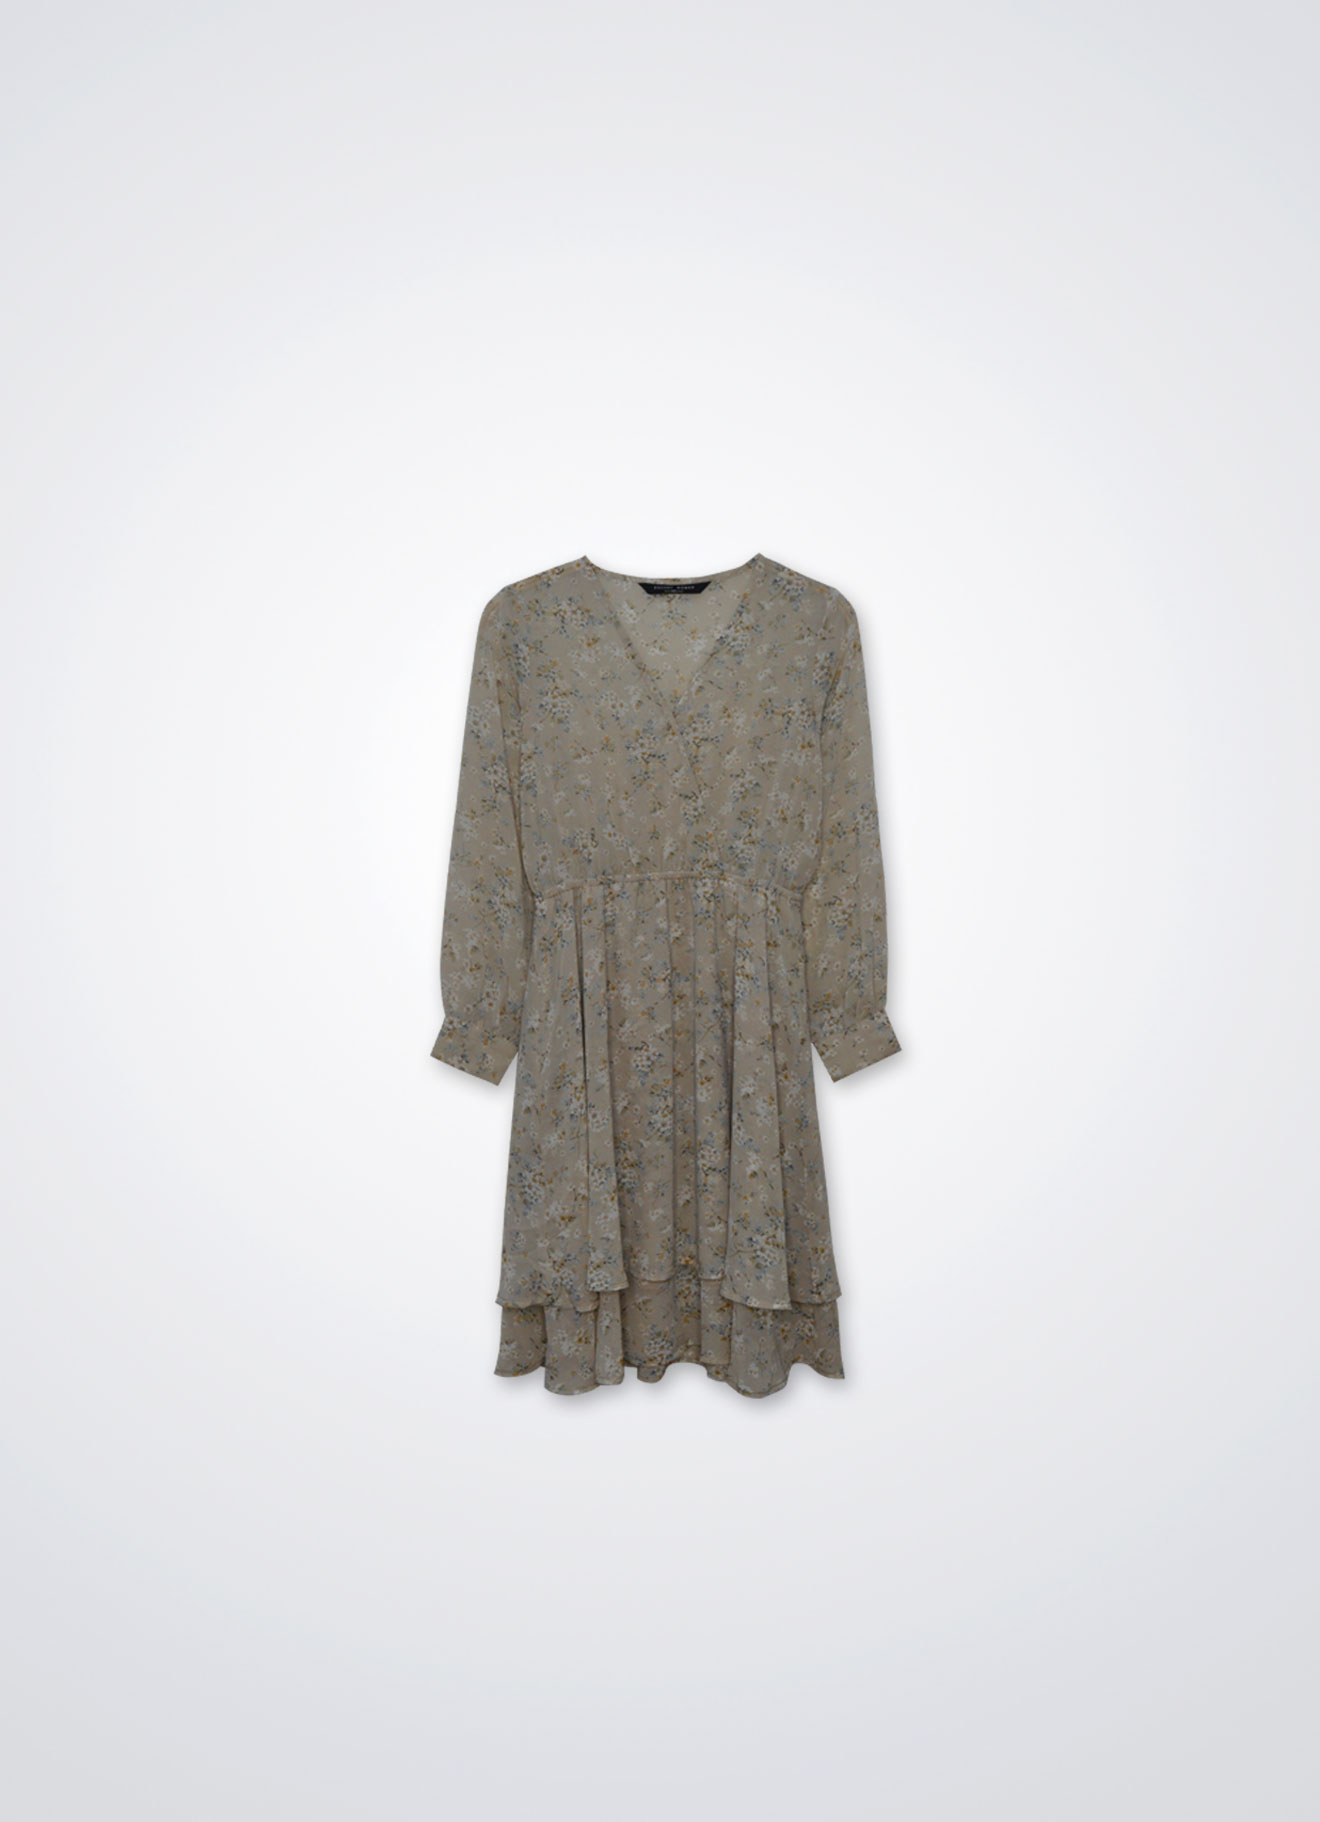 Crystal-Gray by Printed Dress